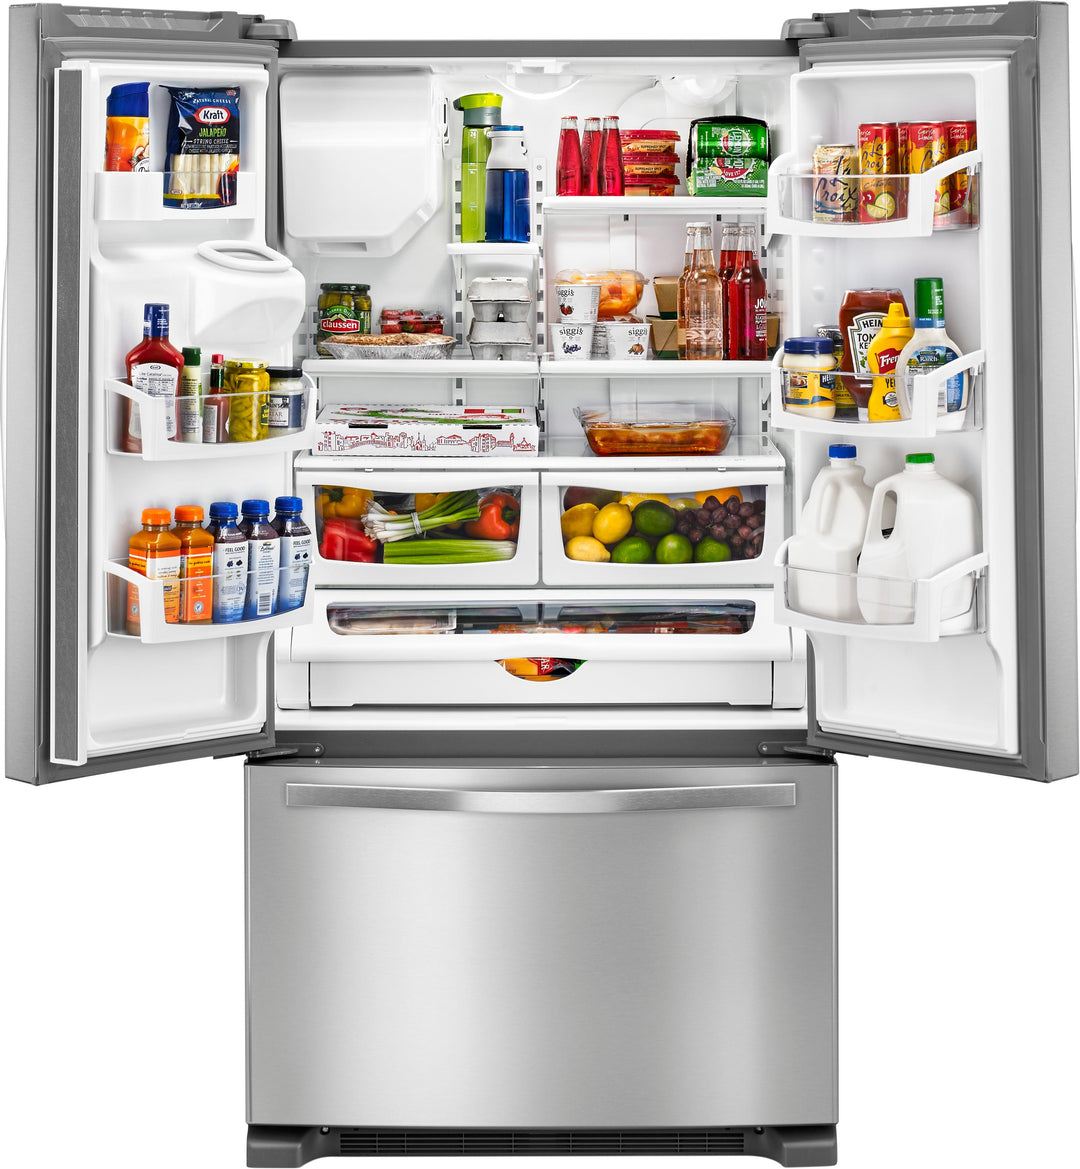 Whirlpool - 24.7 Cu. Ft. French Door Refrigerator - Stainless steel_2